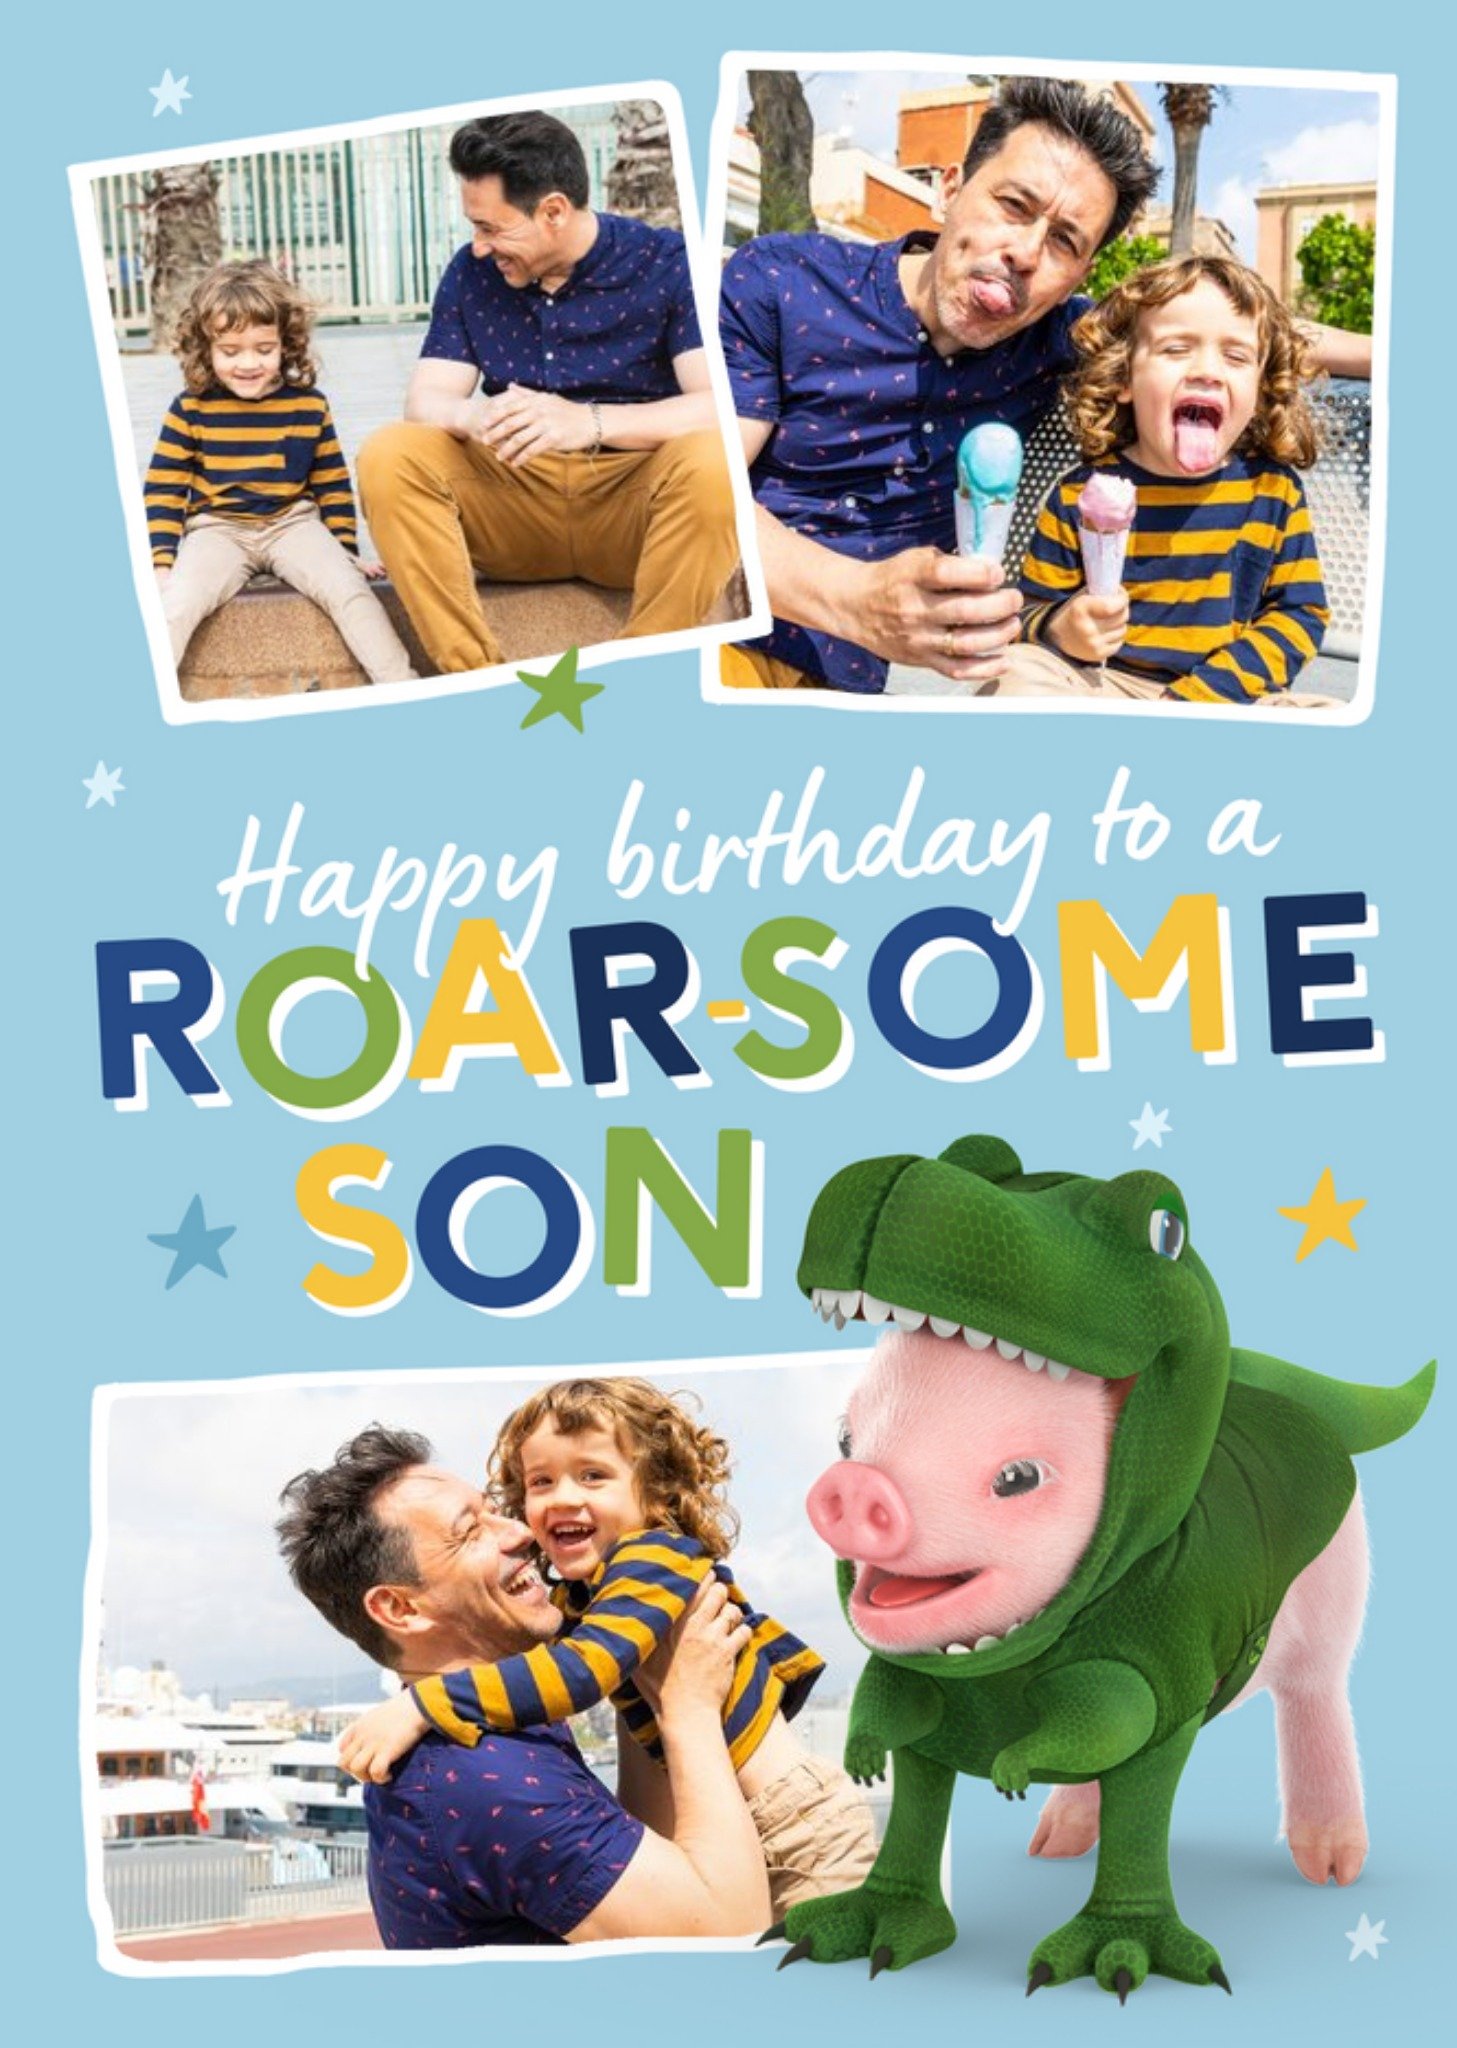 Moonpig Exclusive Moonpigs Dino Pig Roarsome Son Photo Upload Birthday Card, Large